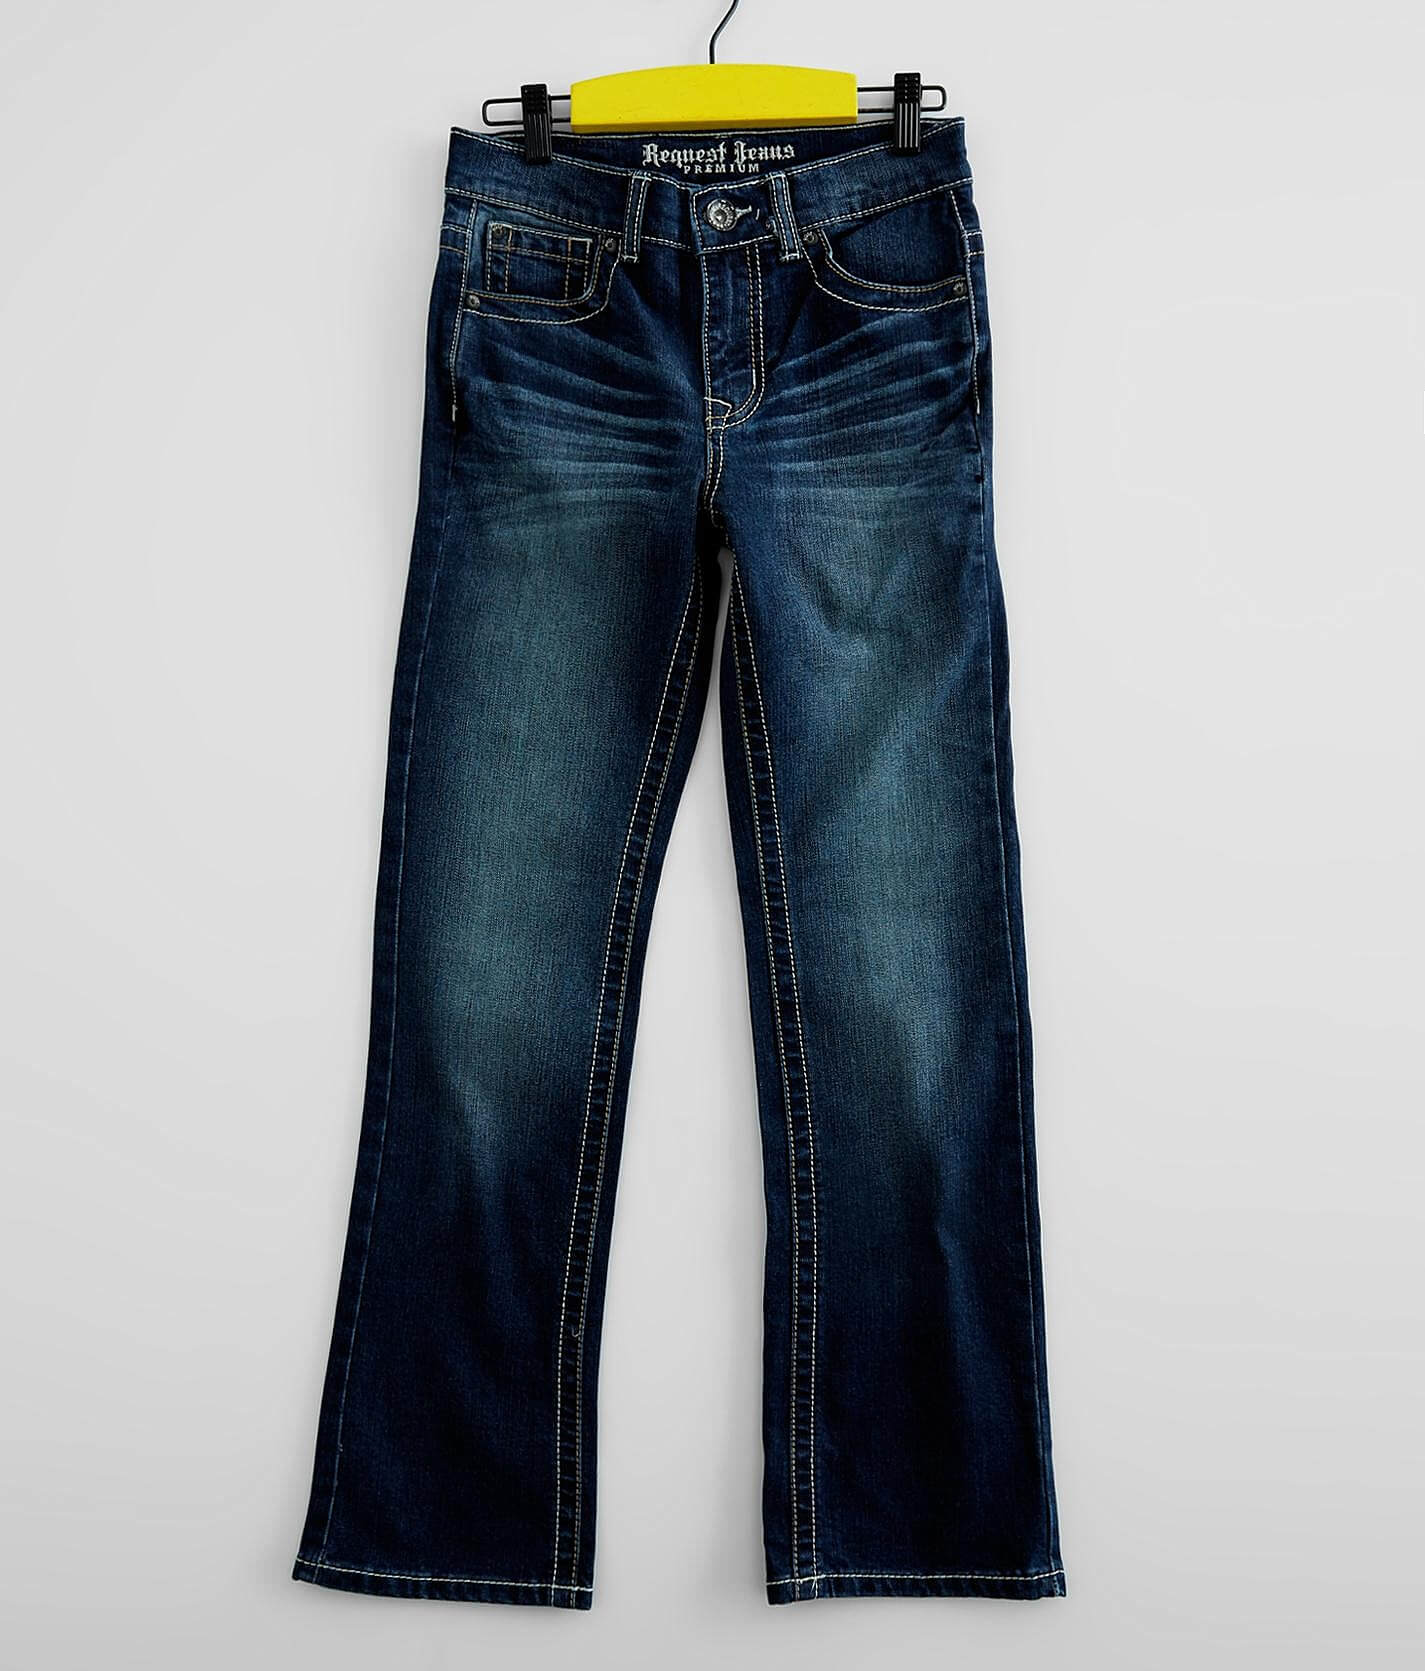 request jeans website